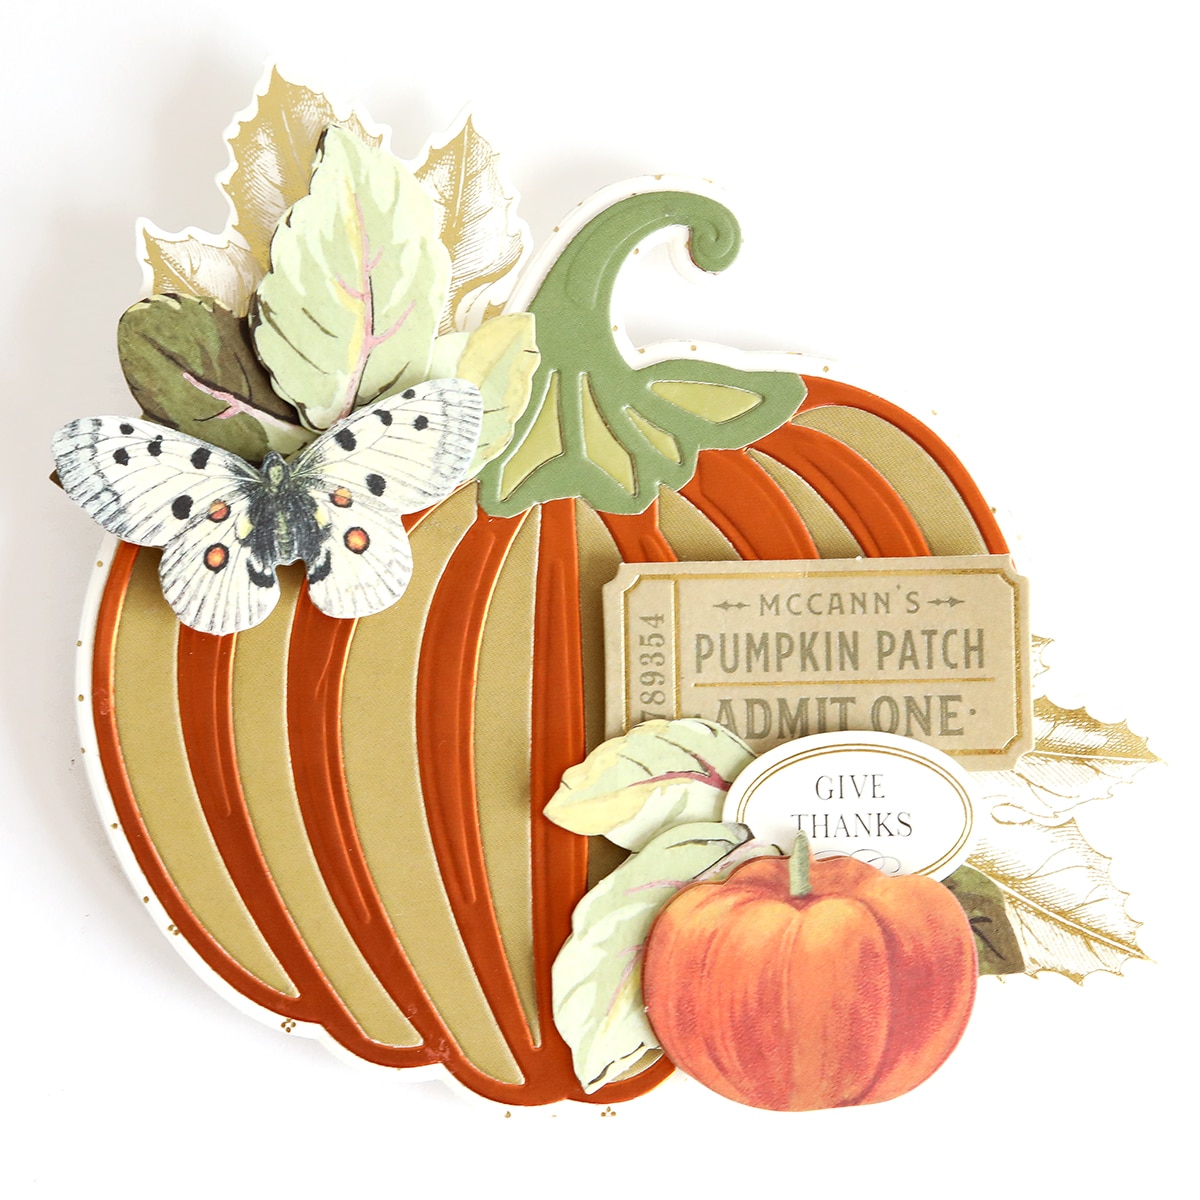 A paper cut out of a pumpkin with leaves and butterflies.